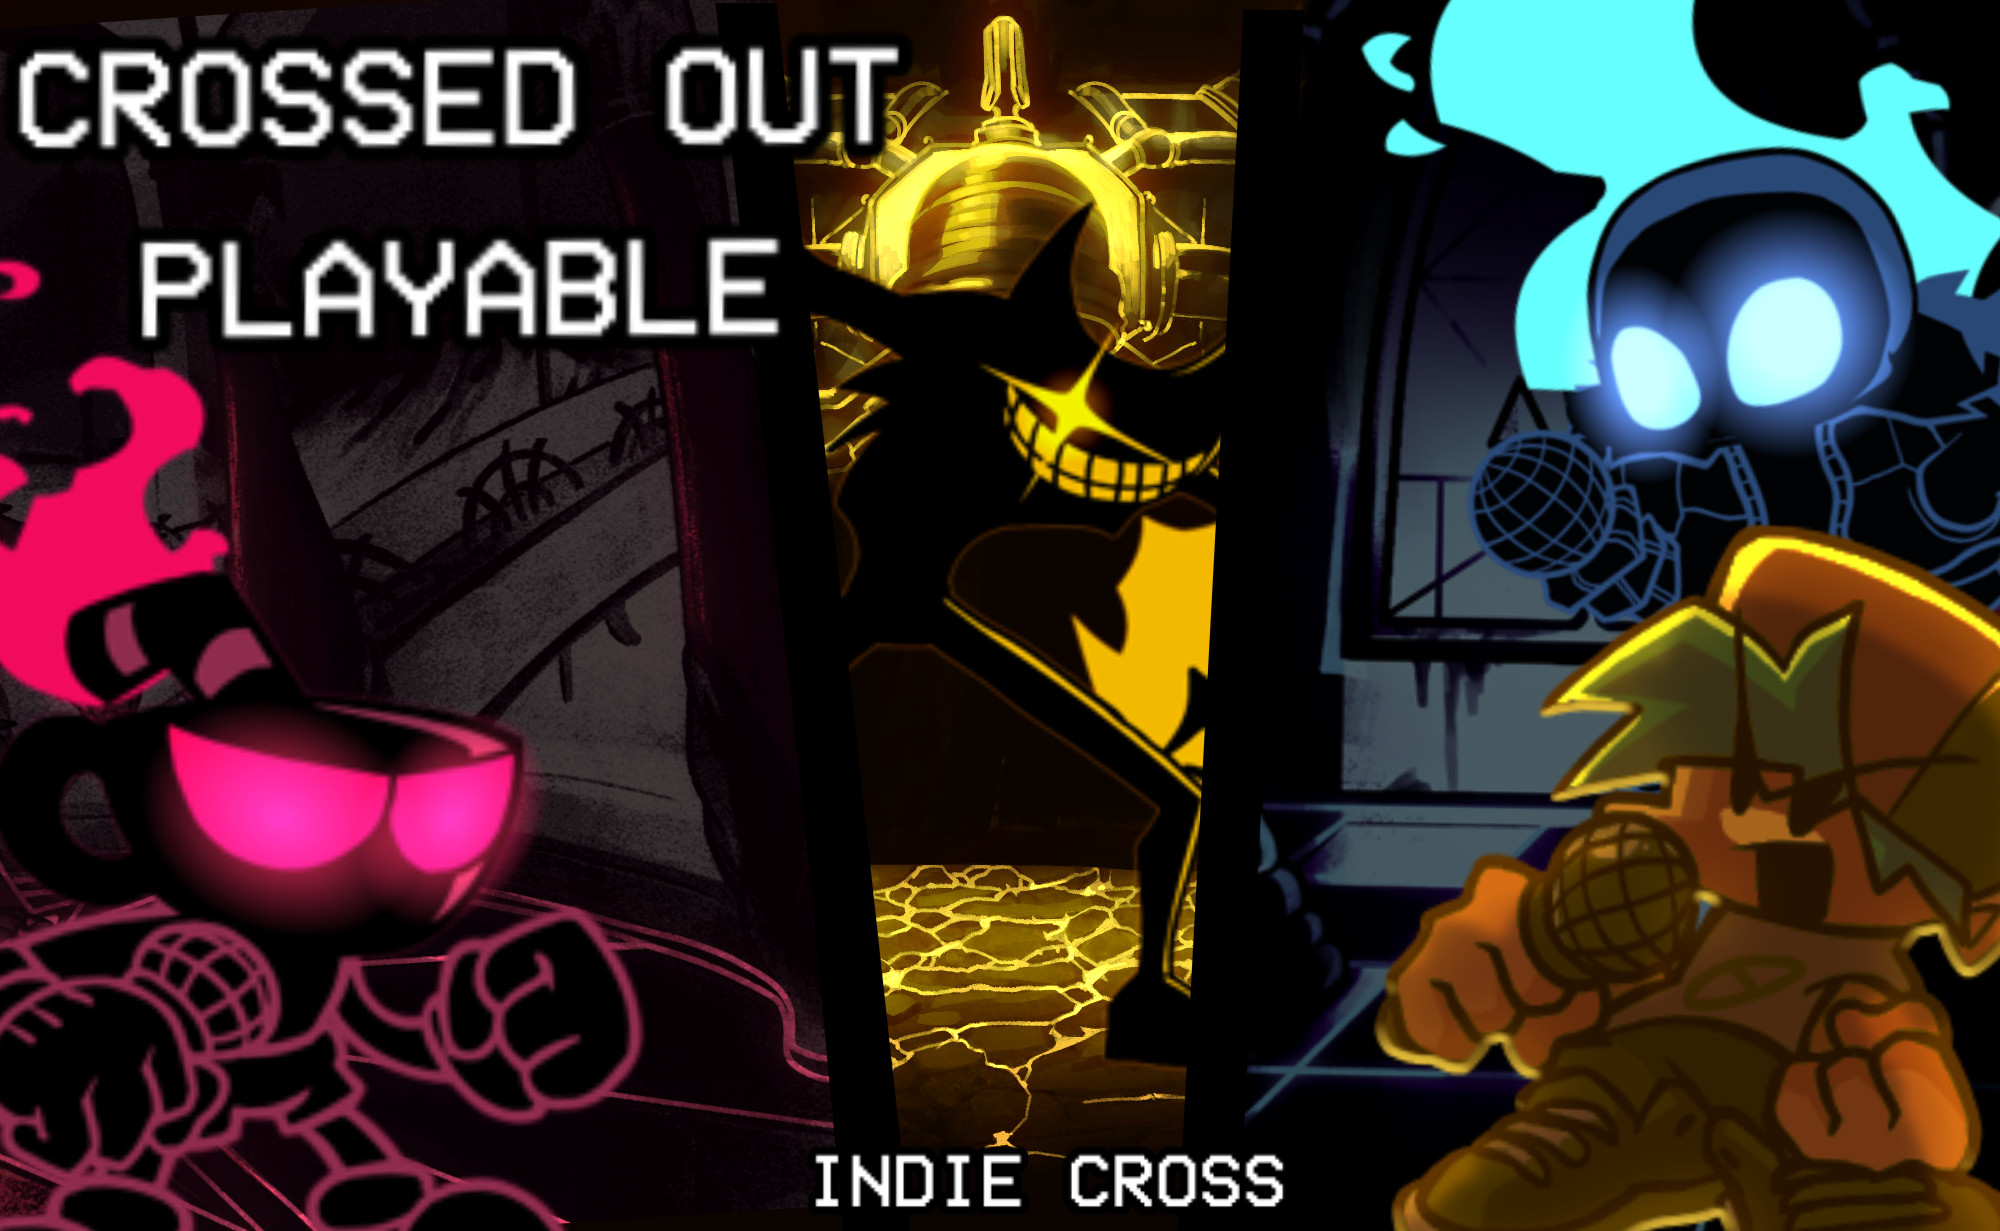 Art and lots of Games — Indie cross is the best FNF mod in existence! I